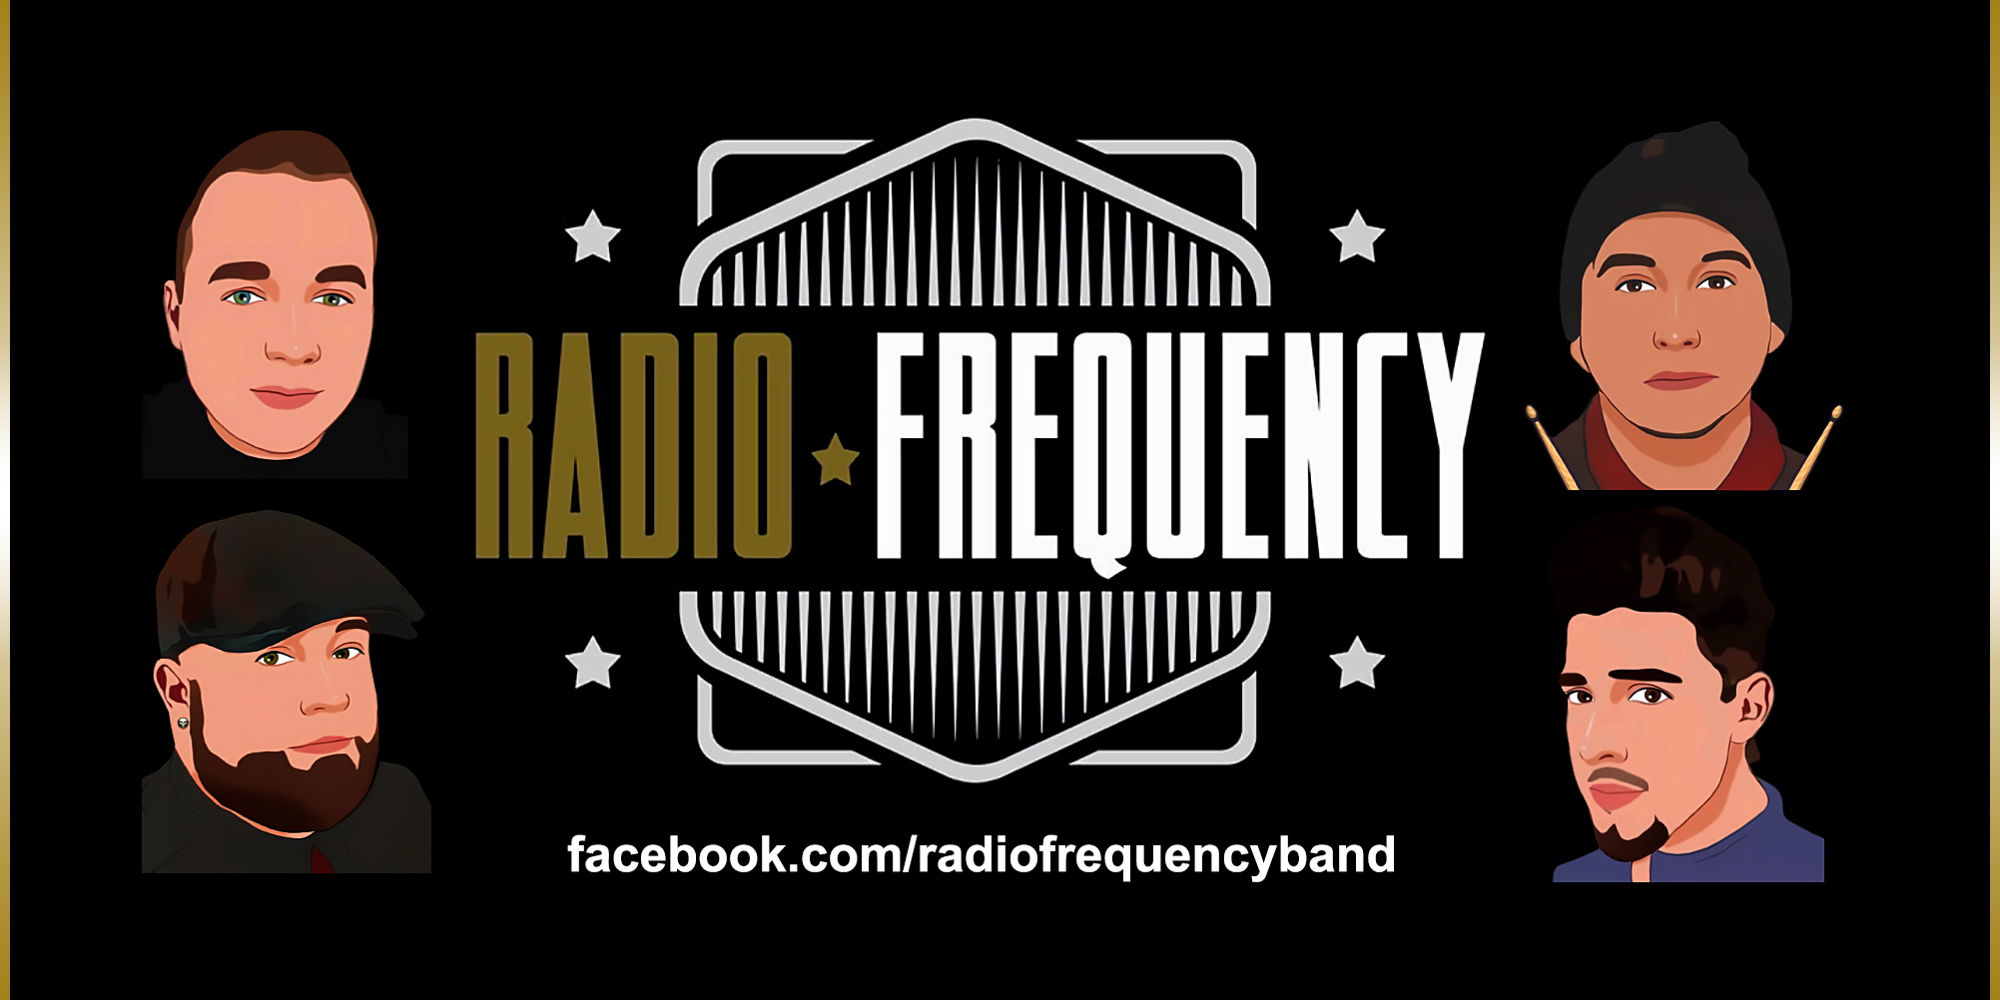 Radio Frequency! promotional image